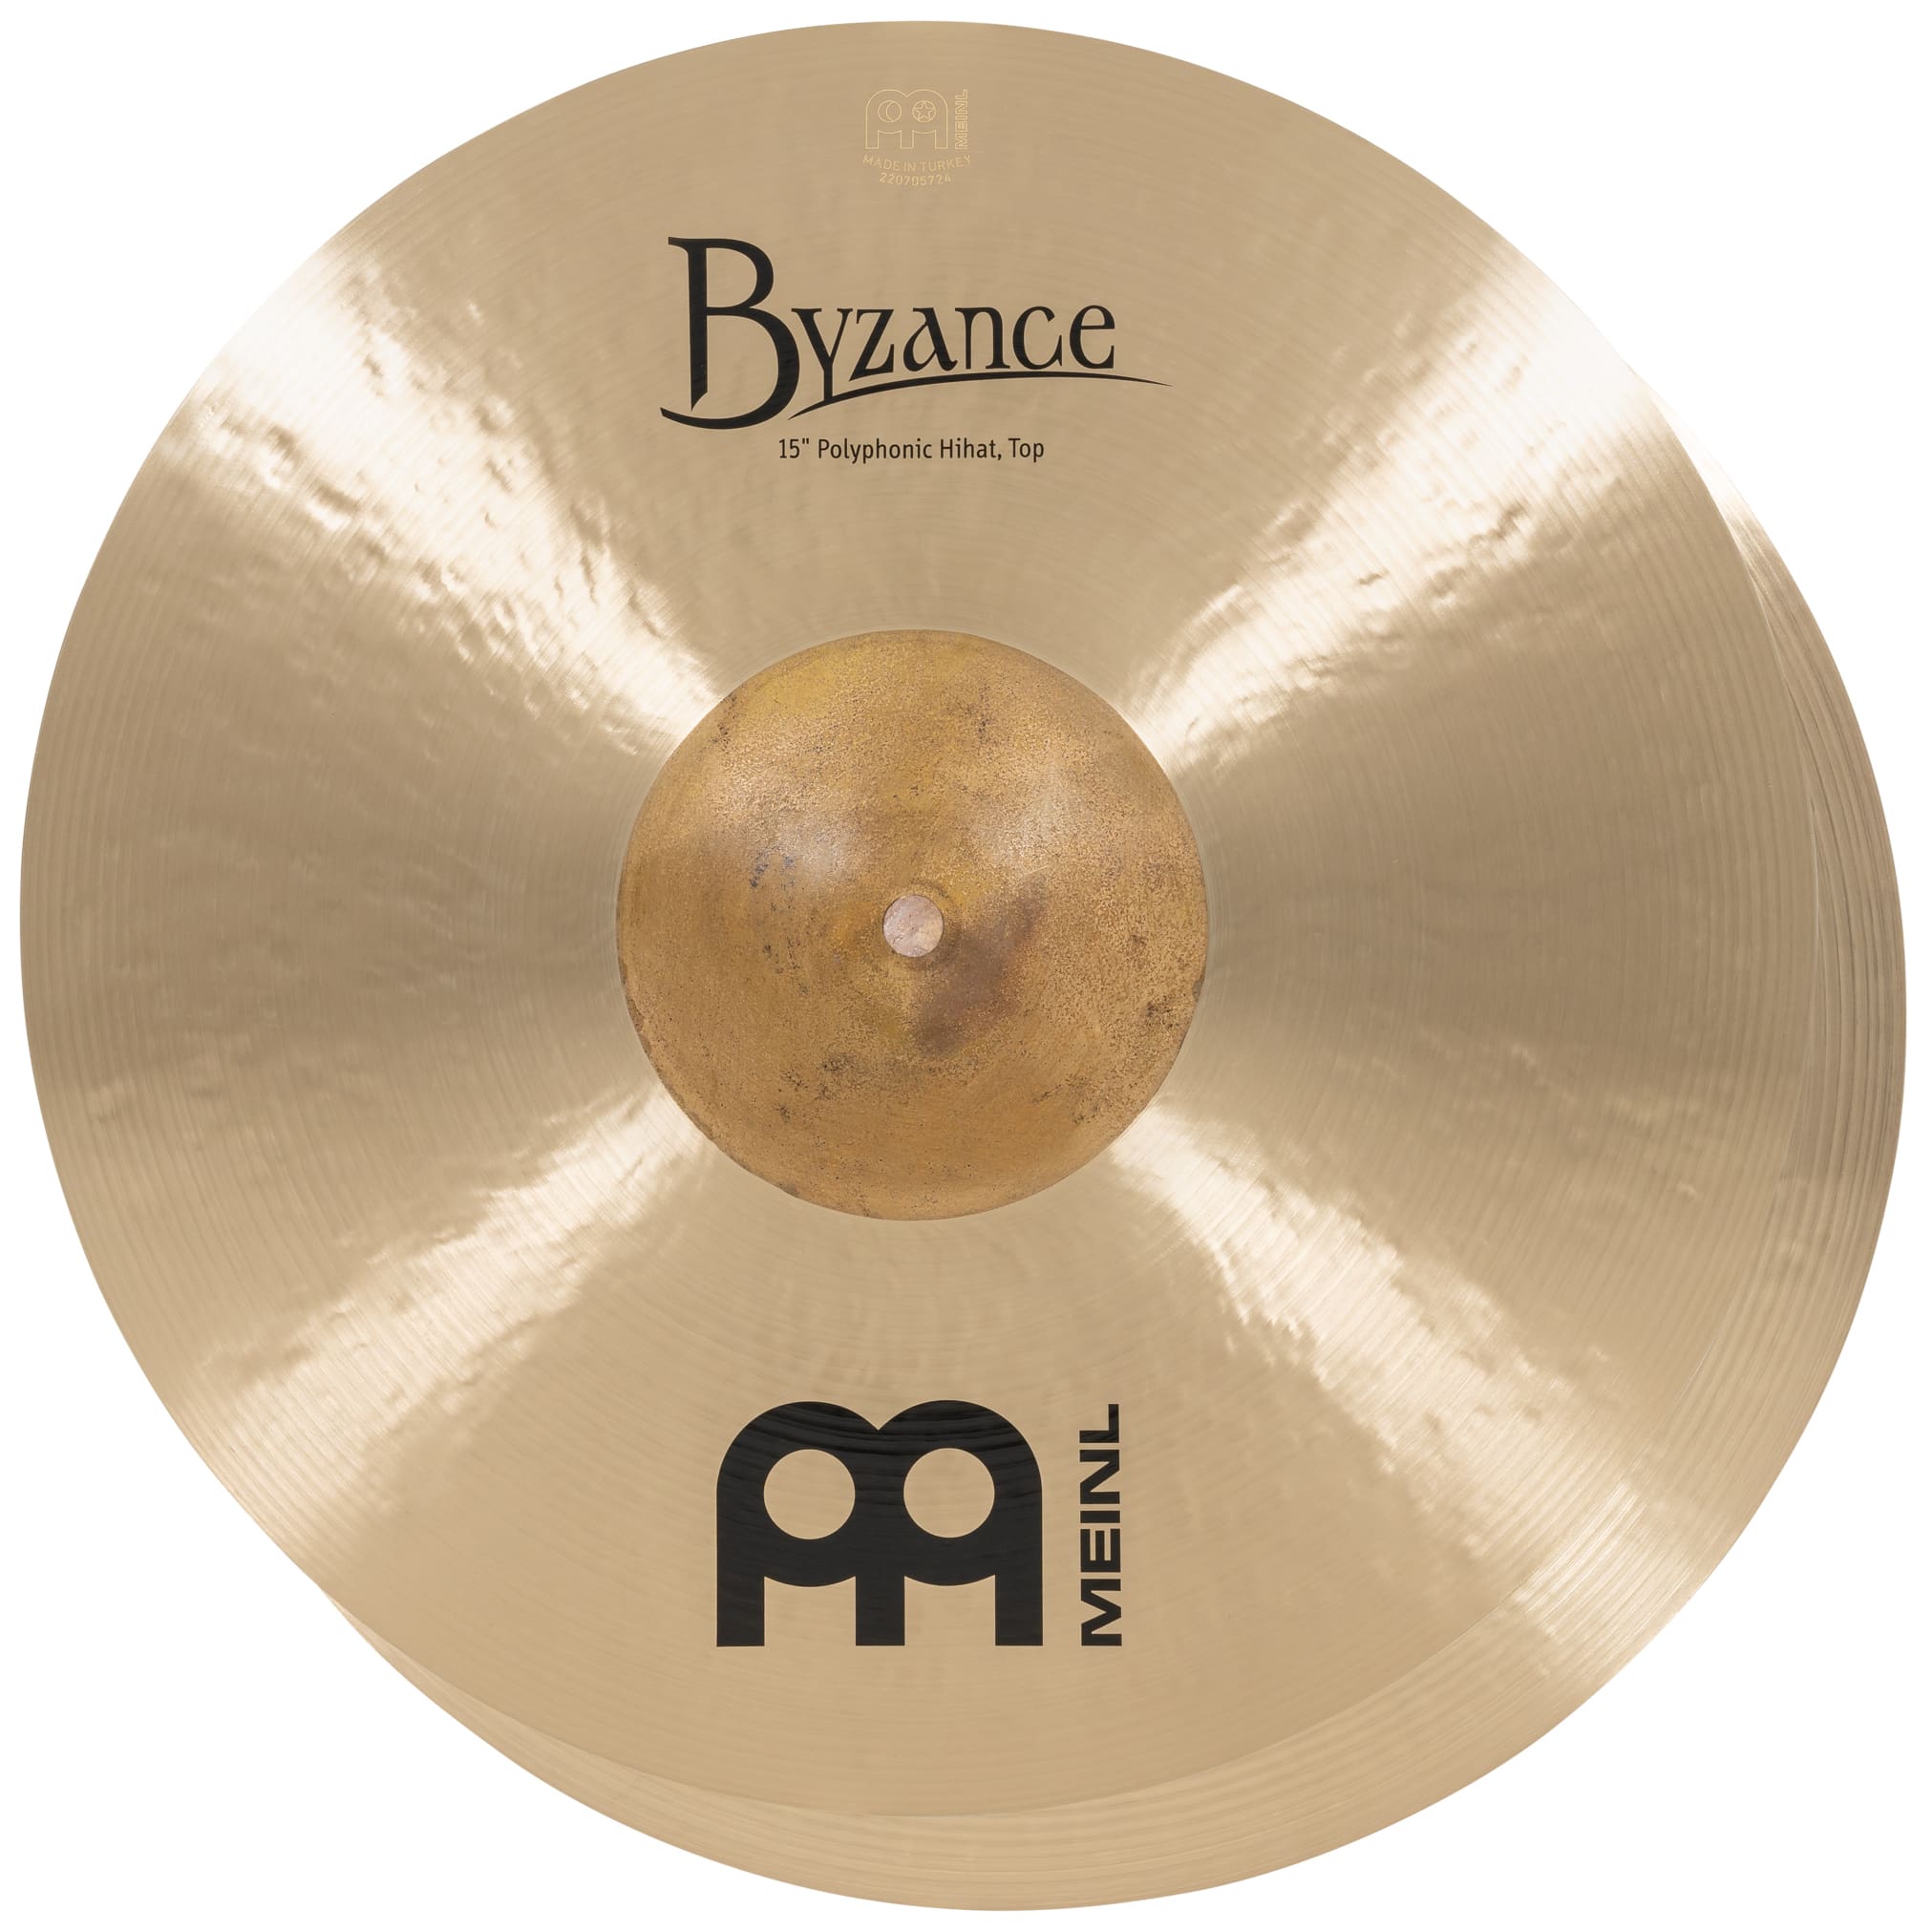 Meinl Cymbals B15POH - 15" Byzance Traditional Polyphonic Hihat